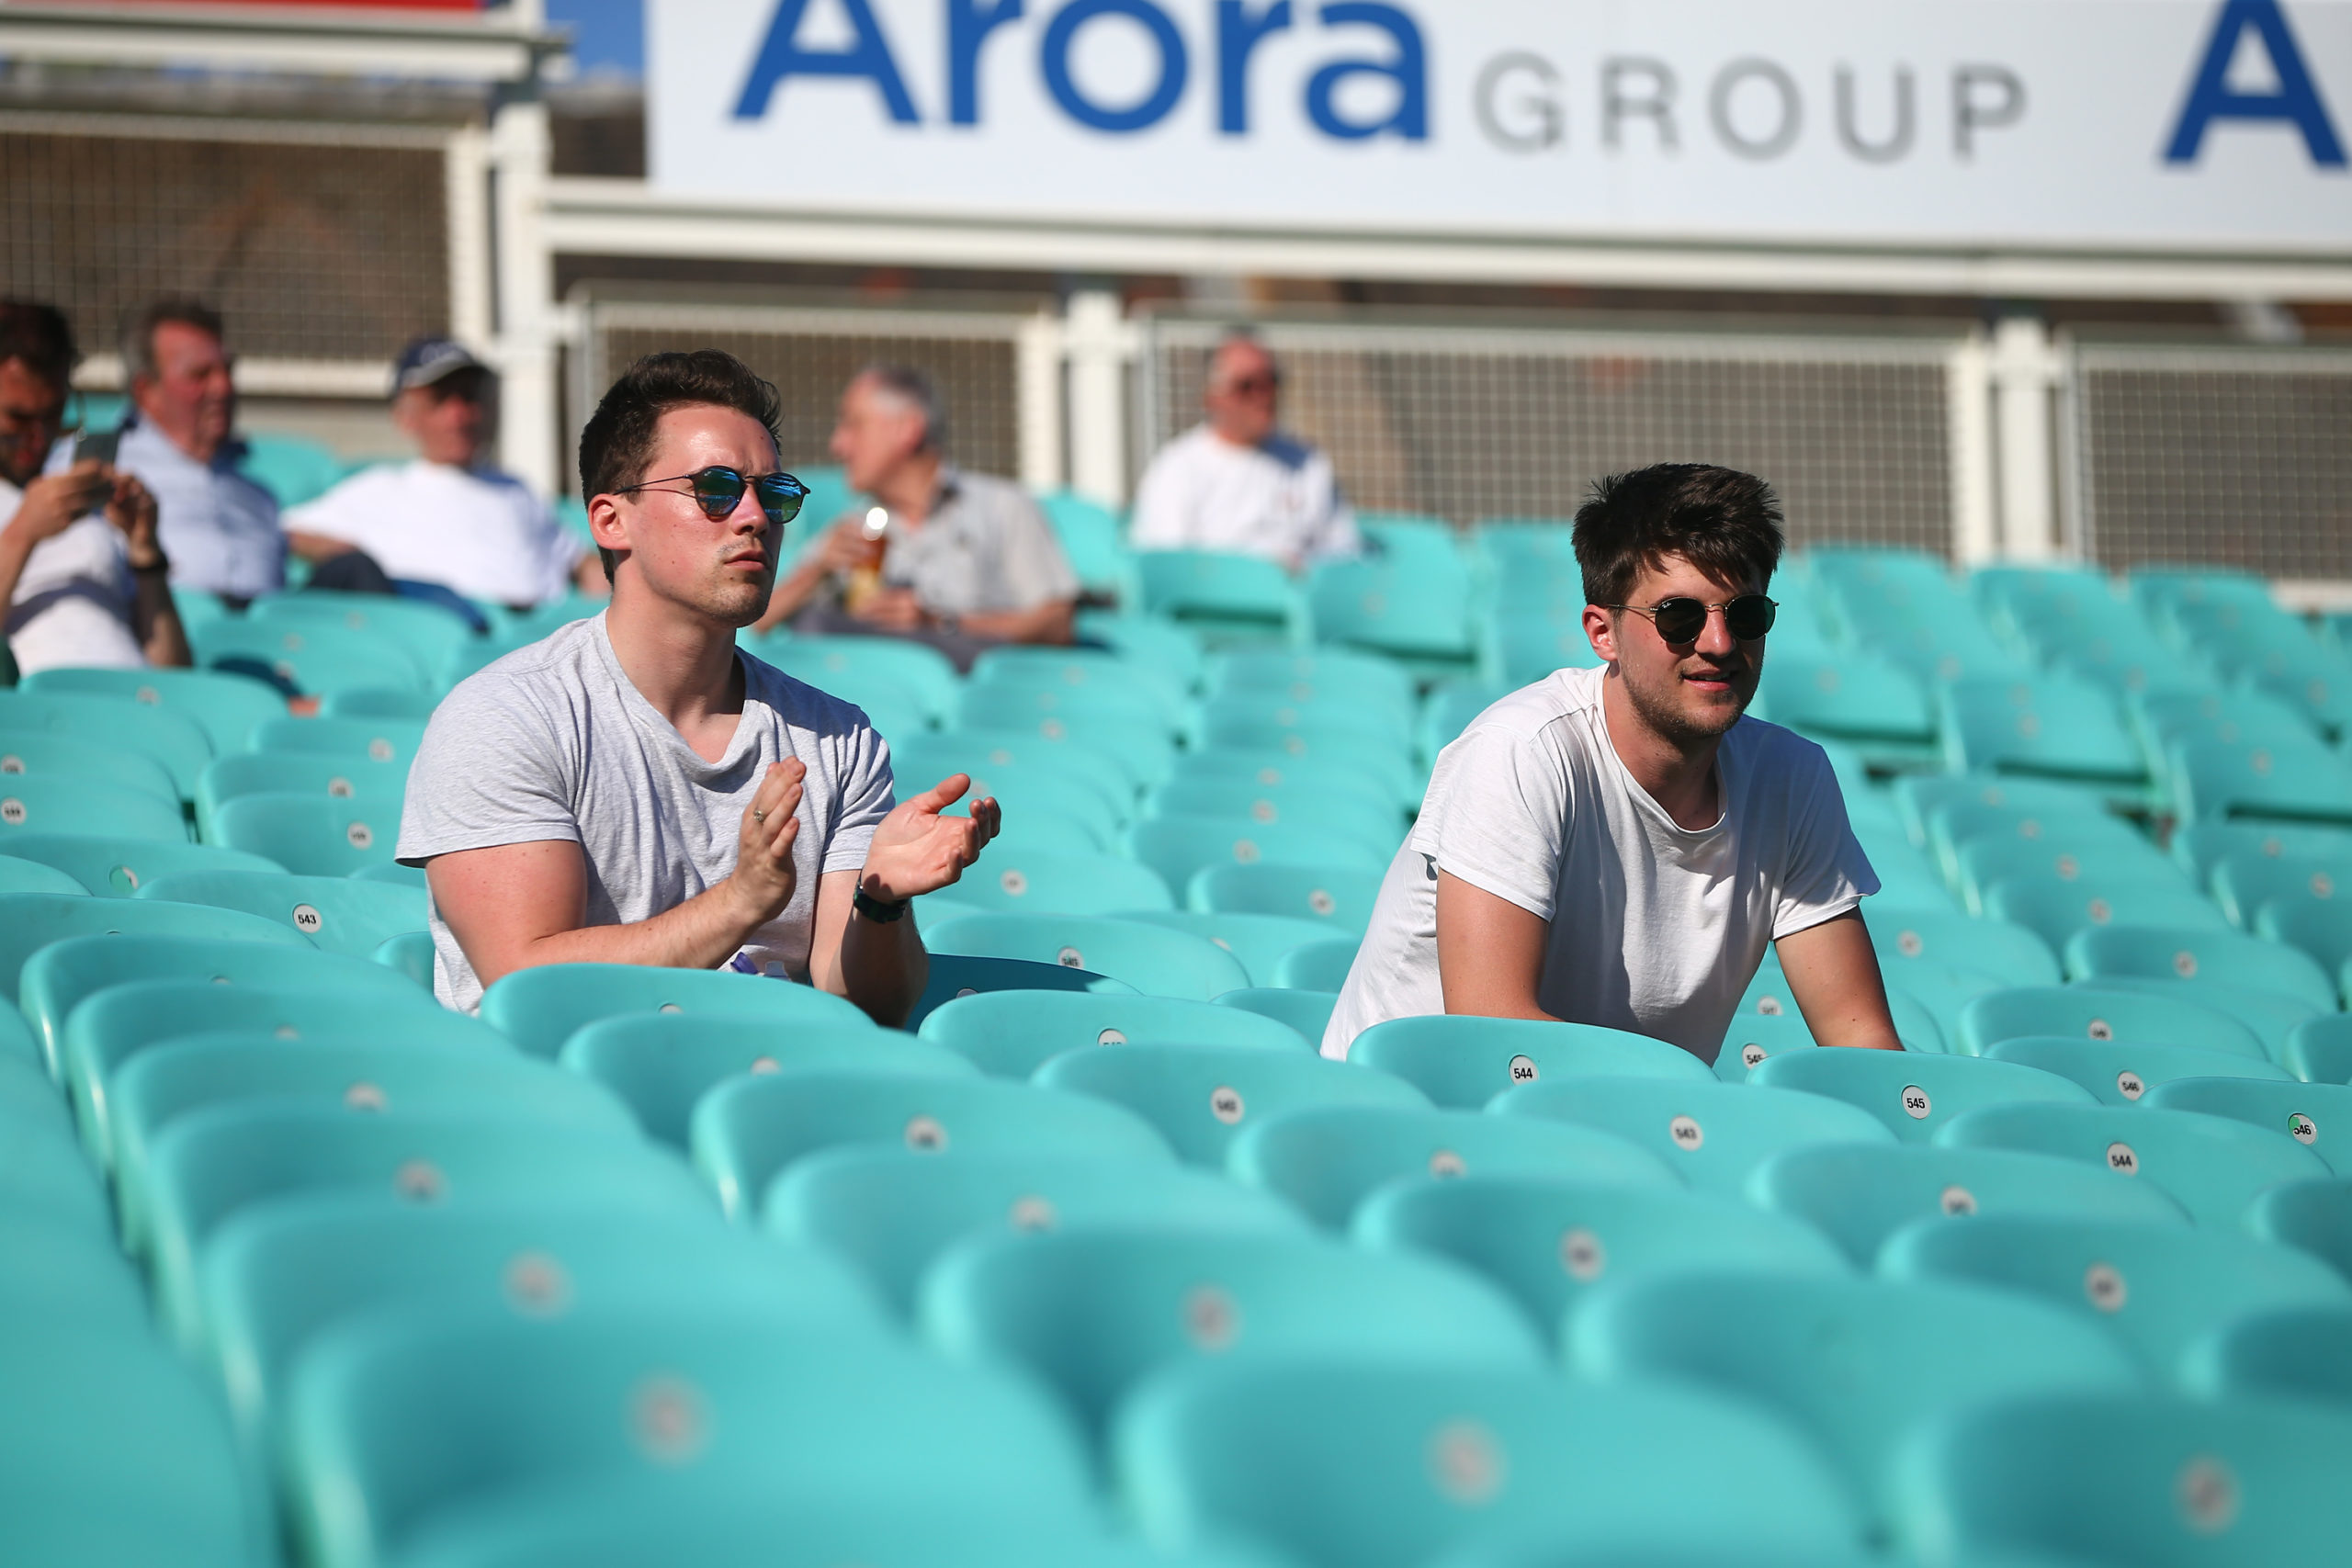 Members Guide to Bringing Guests to The Kia Oval